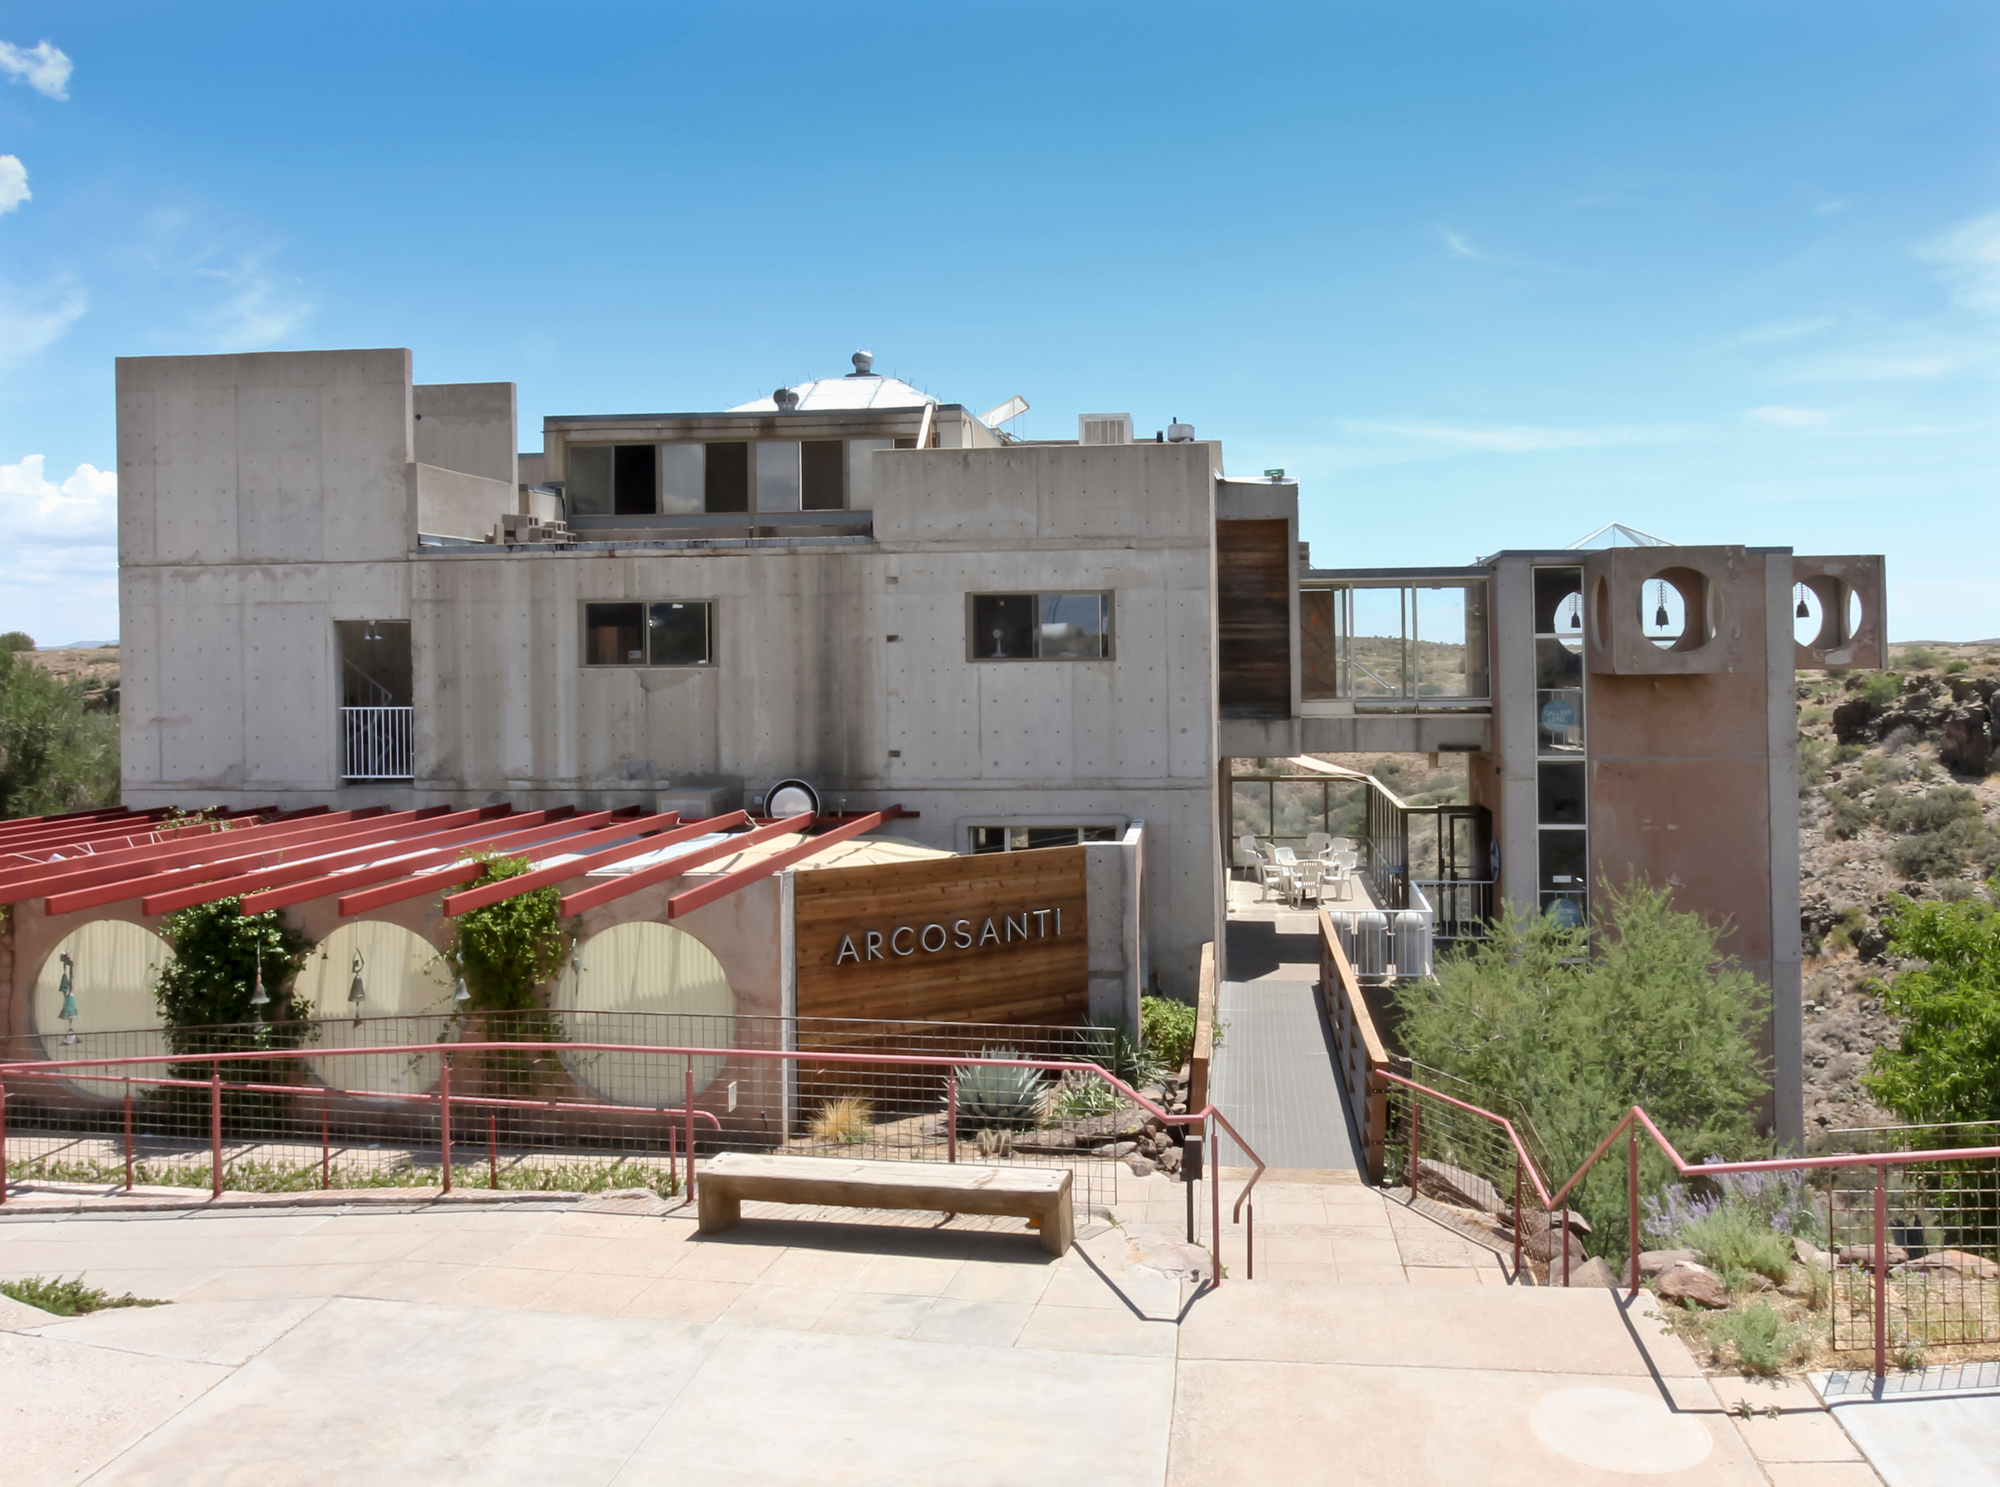 Arcosanti is an architectural project of the nonprofit Cosanti Foundation just north of Scottsdale.